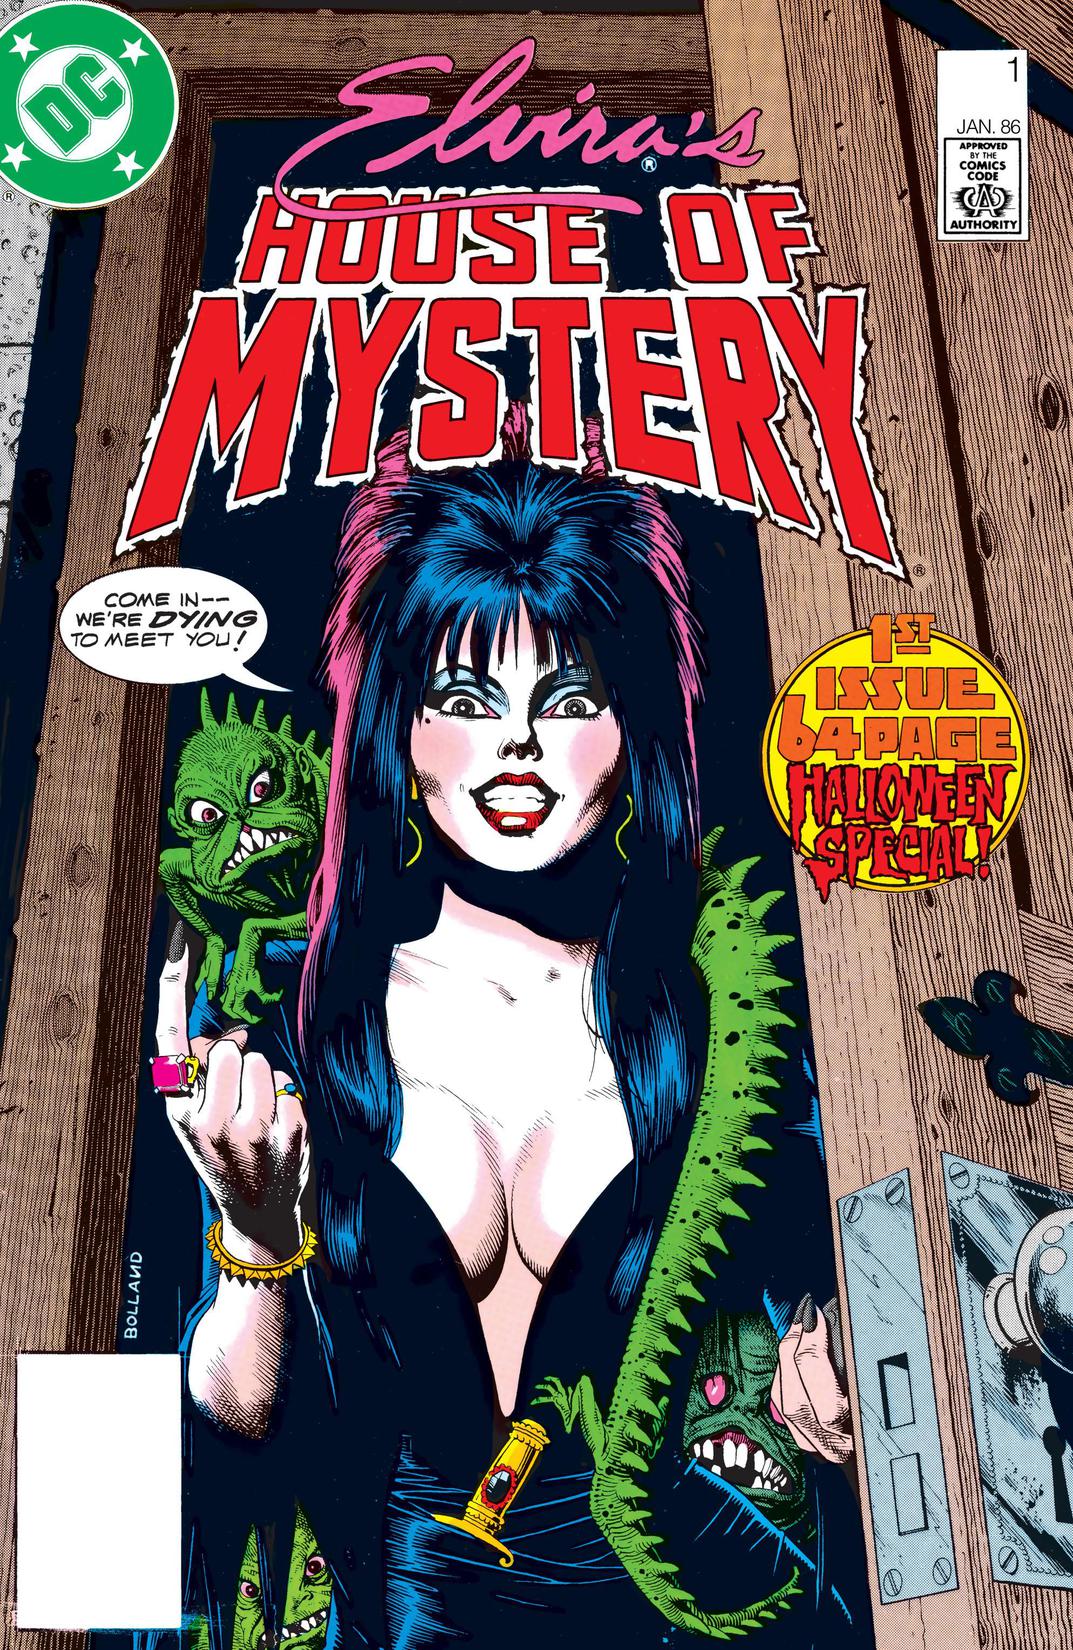 Elvira's House of Mystery #1 preview images